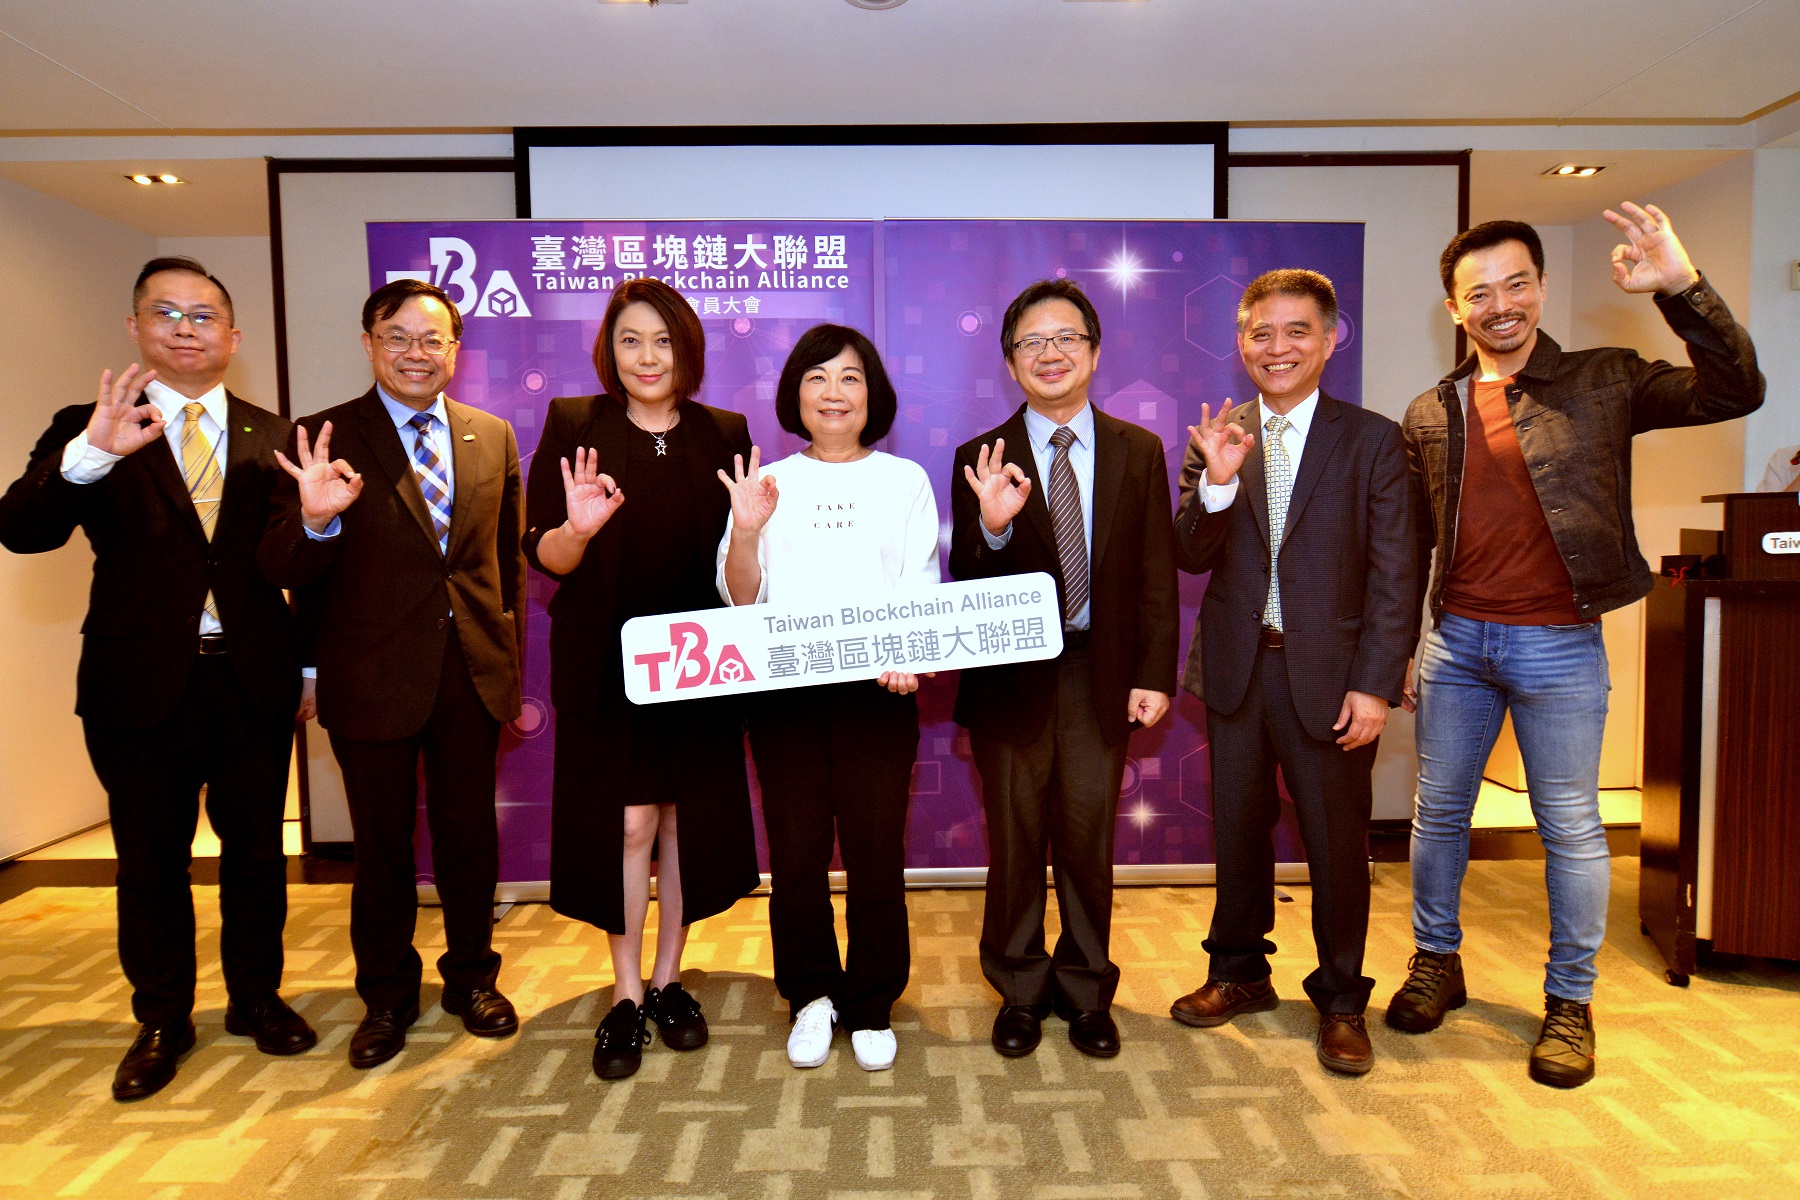 Researcher Fellow Hsien-liang Chu (second from the right) attended the general meeting of Taiwan Blockchain Alliance to share the current status of blockchain services promoted by National Center for High-performance Computing